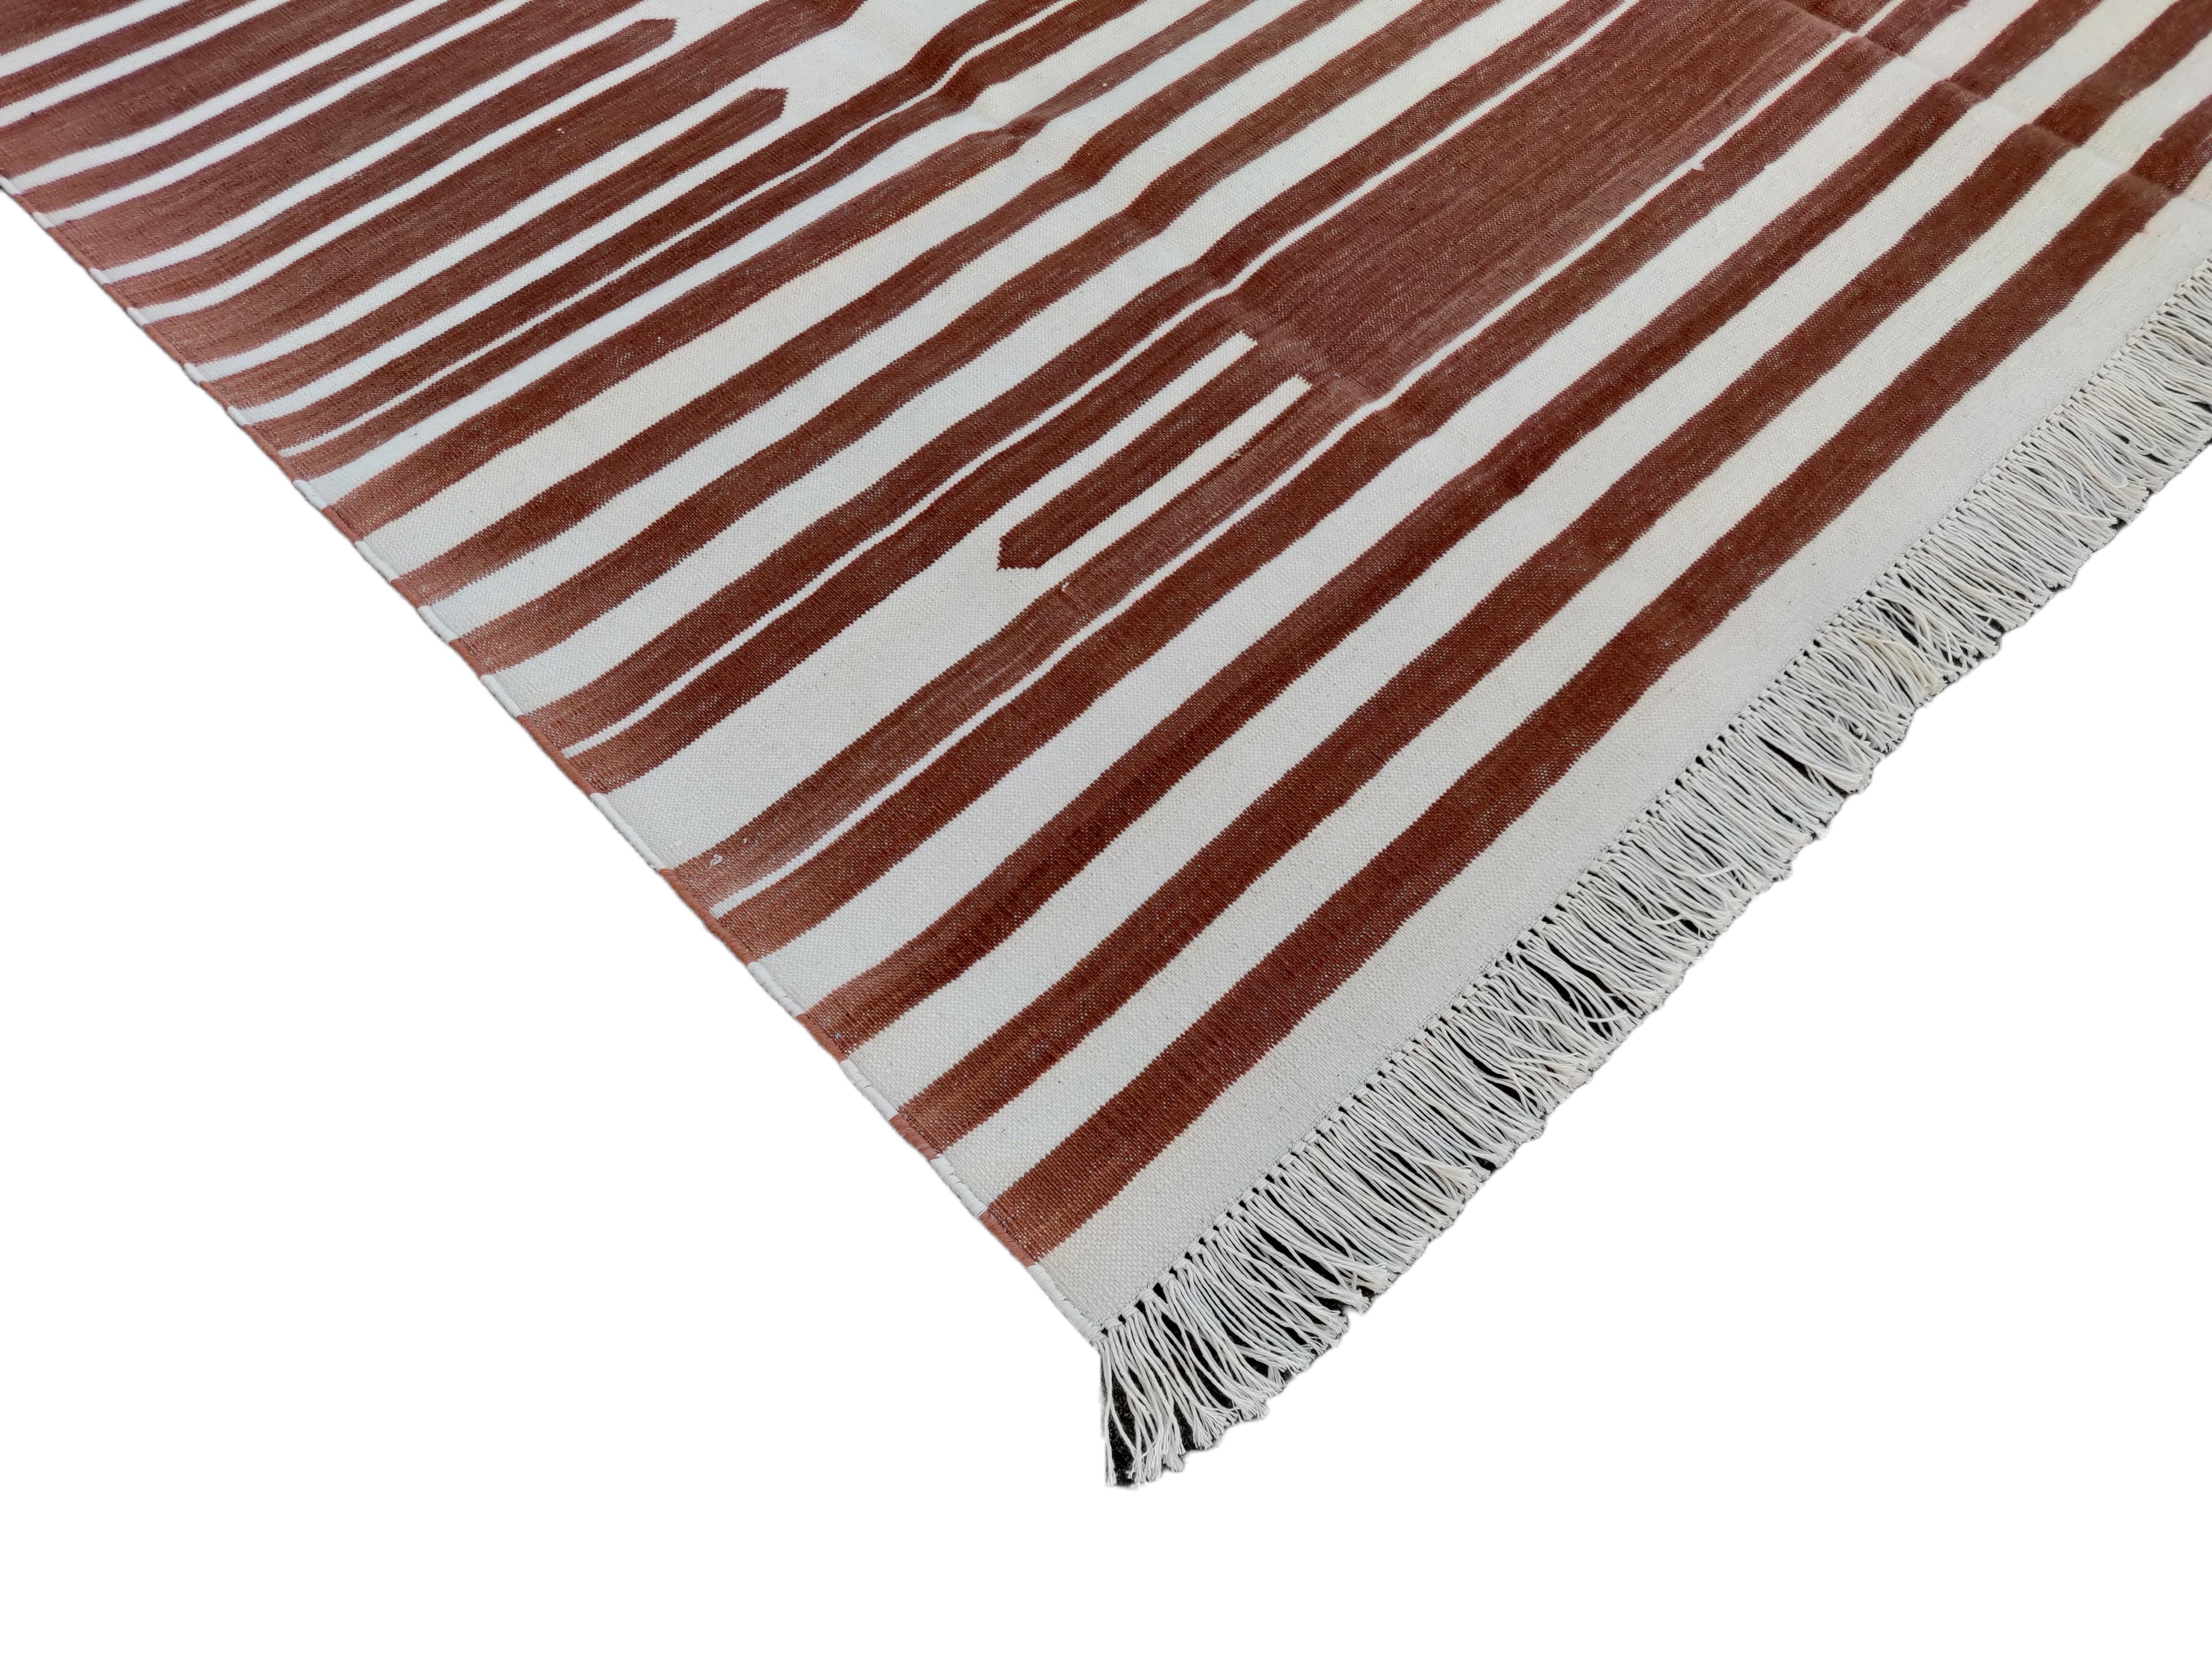 Cotton Vegetable Dyed Tan And White Striped Indian Dhurrie Rug-5'x7' (150x210cm) 

These special flat-weave dhurries are hand-woven with 15 ply 100% cotton yarn. Due to the special manufacturing techniques used to create our rugs, the size and color